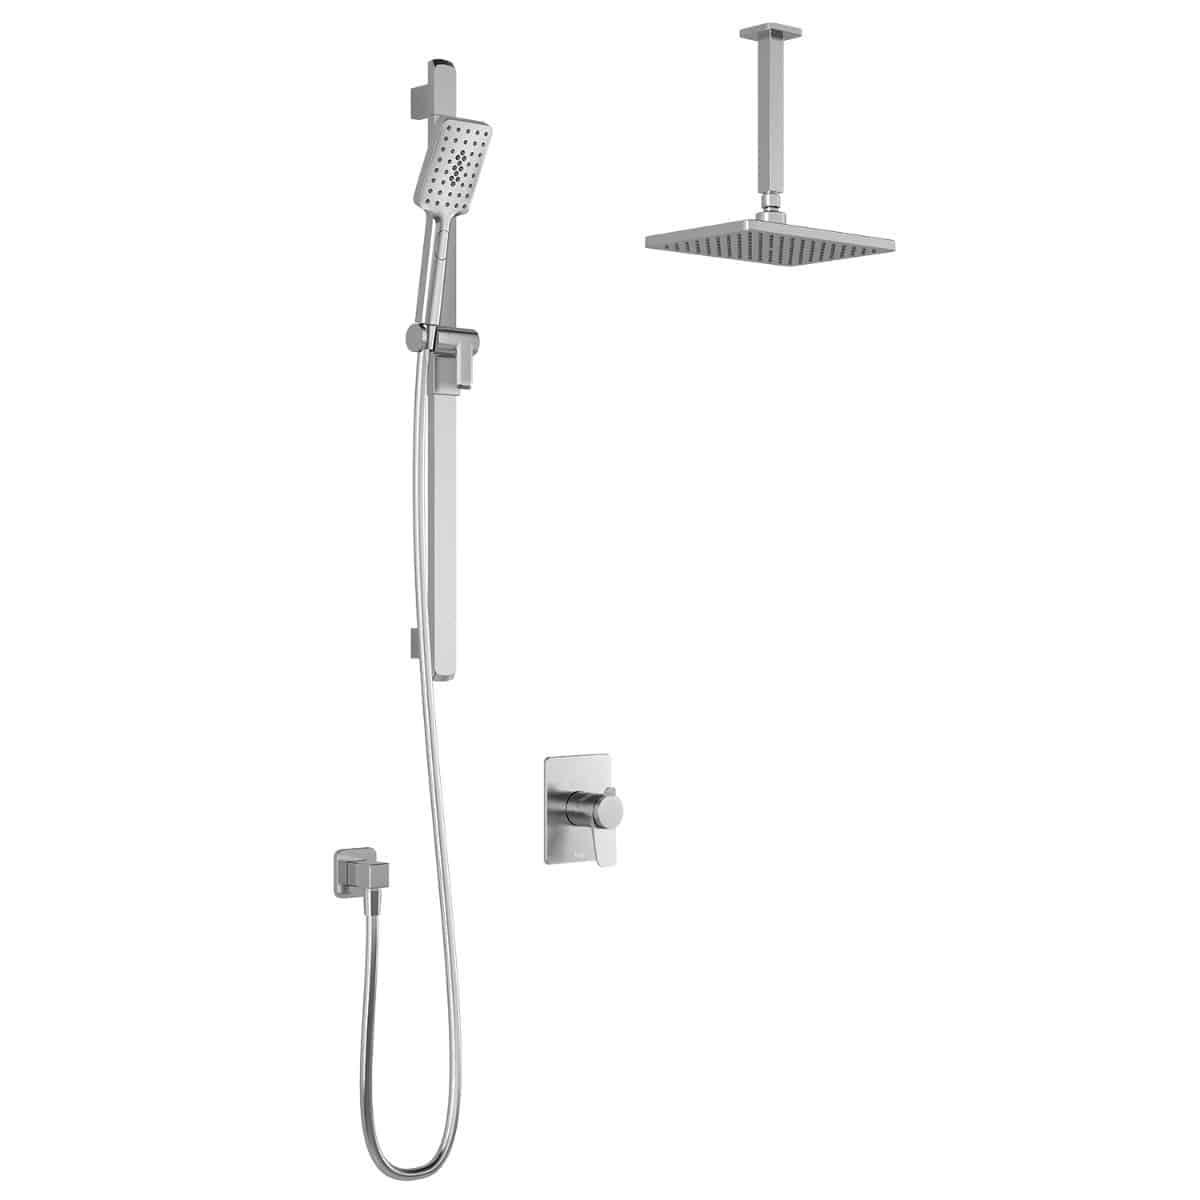 Kalia MOROKA TCD1 (Valve Not Included) AQUATONIK T/P Coaxial Shower System with Vertical Ceiling Arm -Chrome